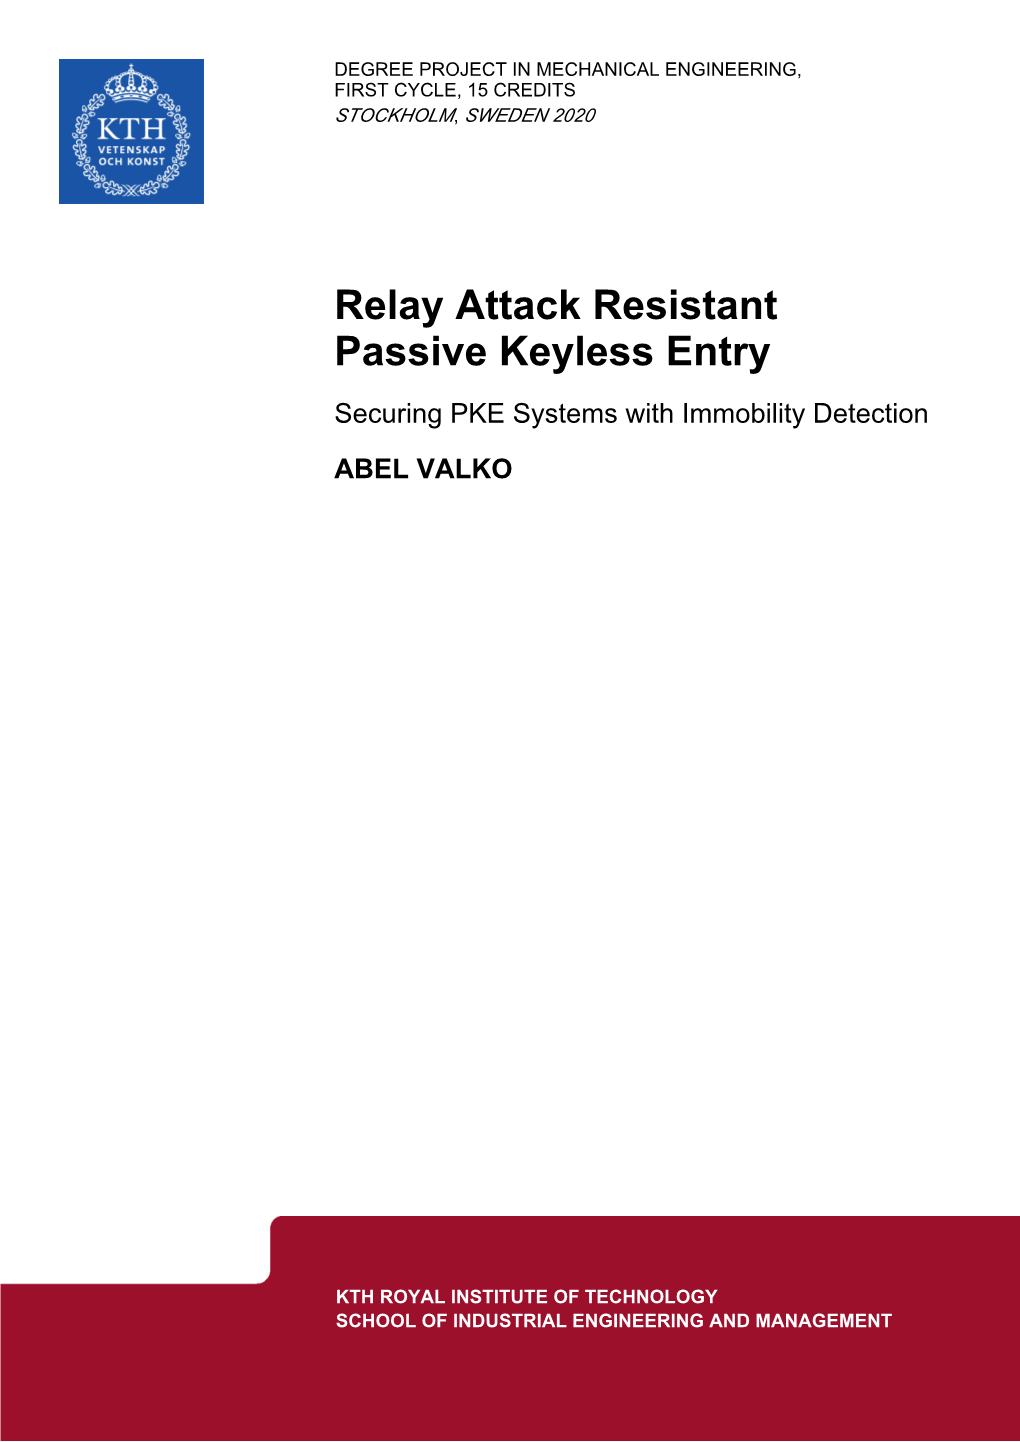 Relay Attack Resistant Passive Keyless Entry Securing PKE Systems with Immobility Detection